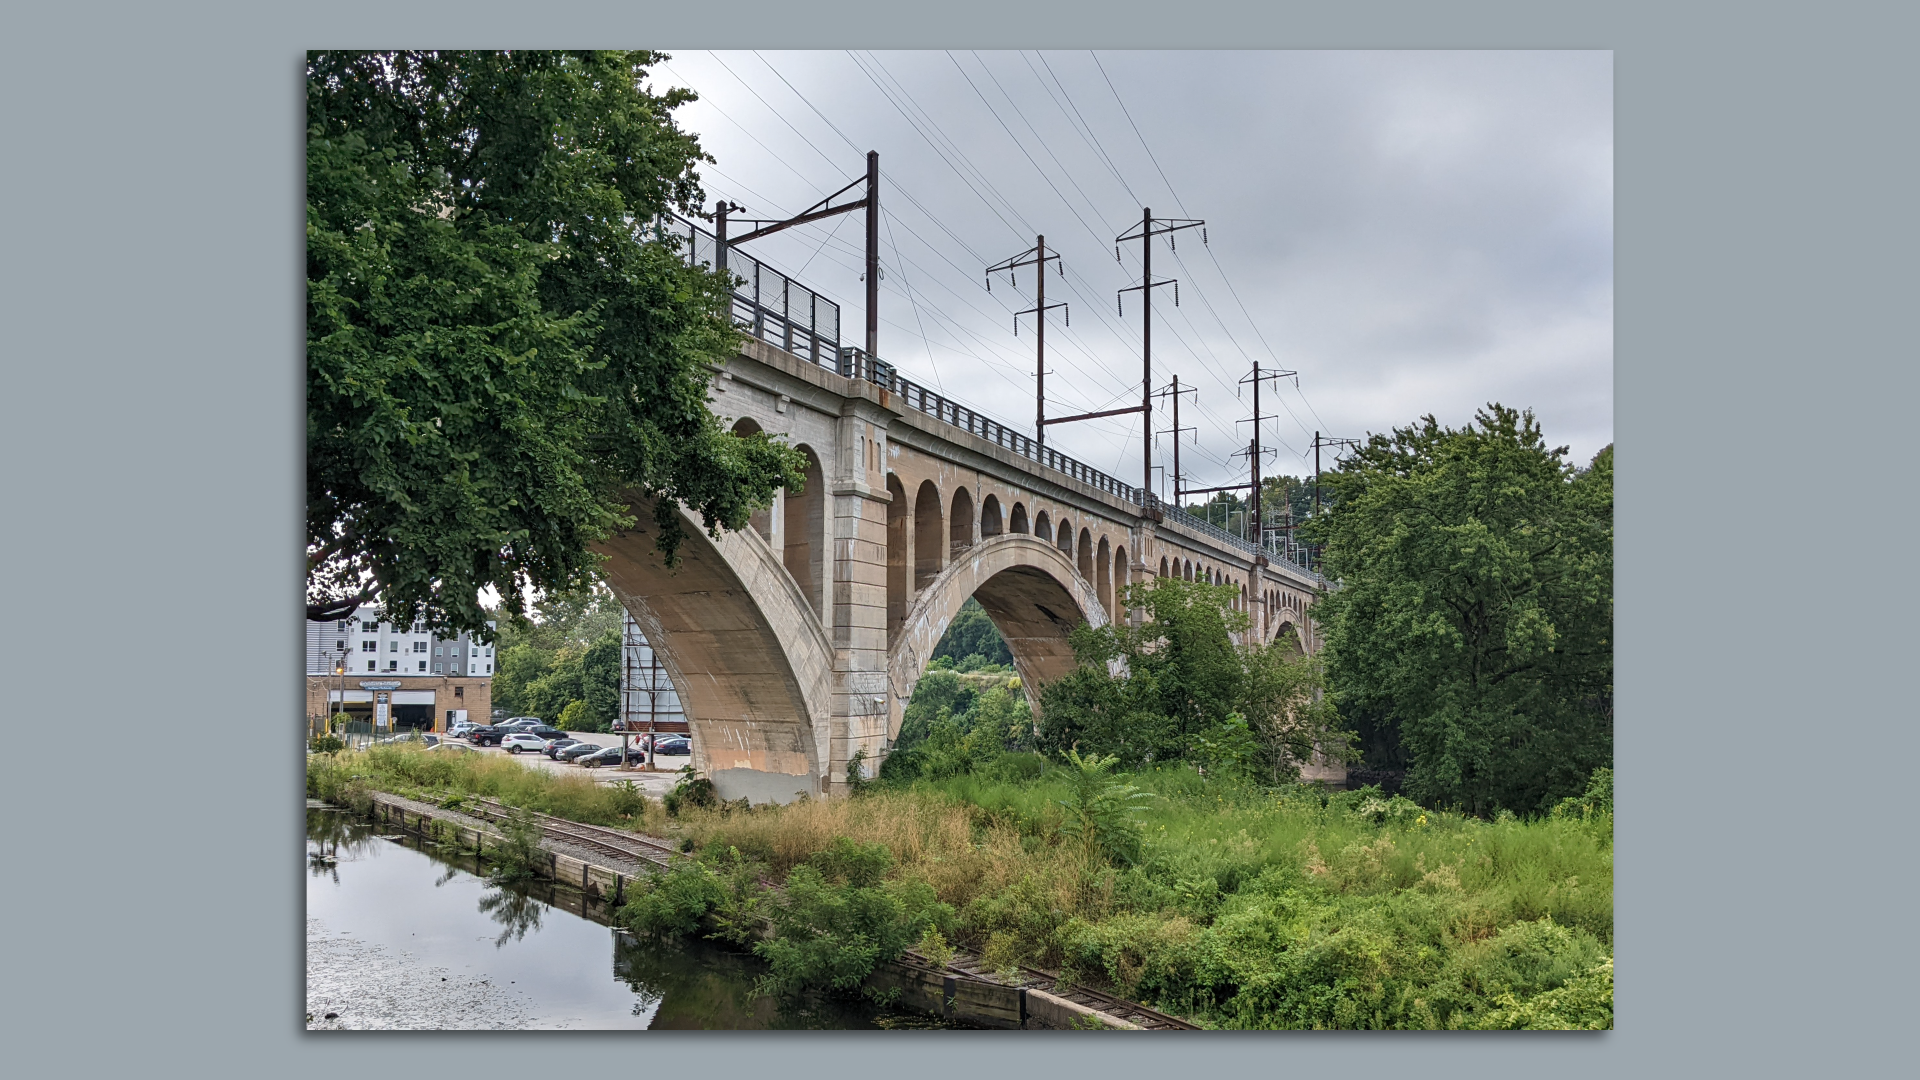 A view of the Manayunk Bridge 